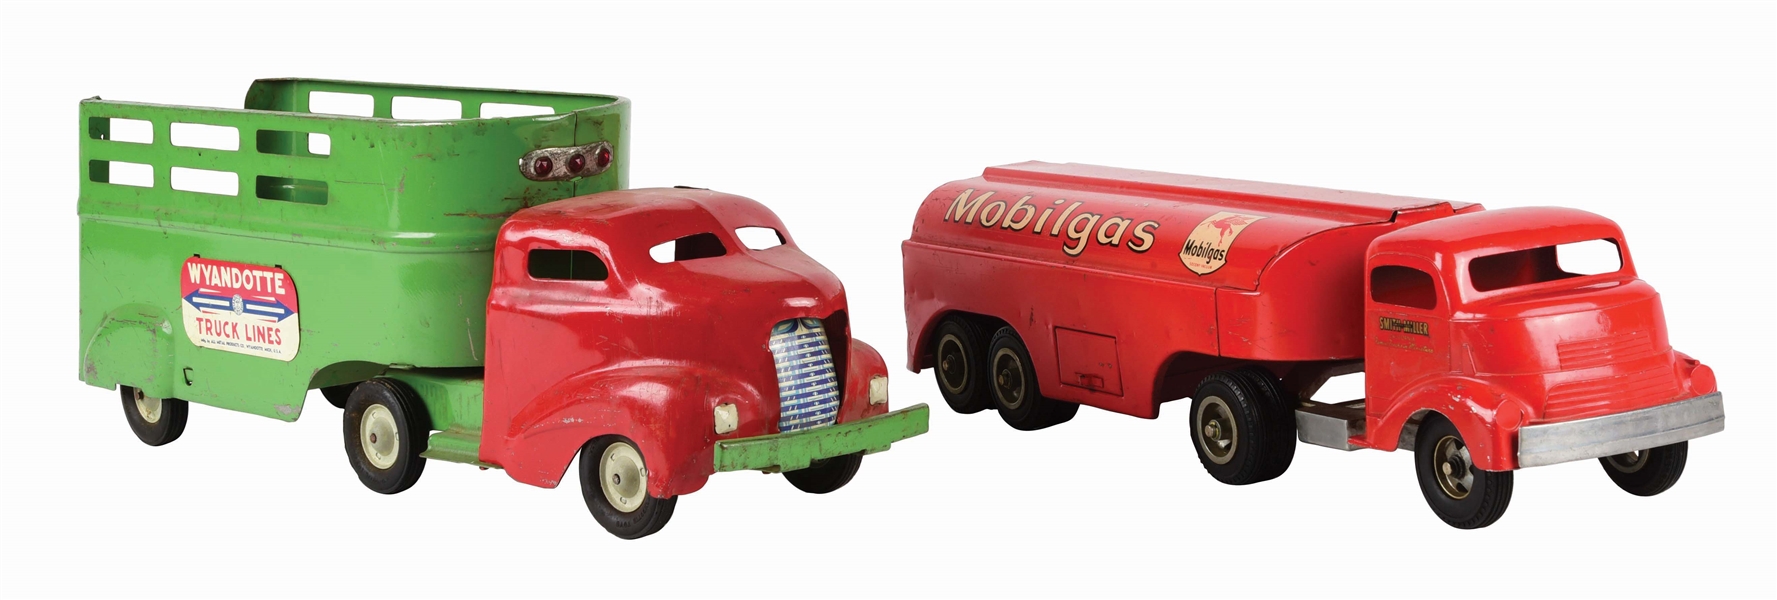 LOT OF 2: AMERICAN MADE PRESSED STEEL SMITH MILLER AND WYANDOTTE TRACTOR TRAILERS.